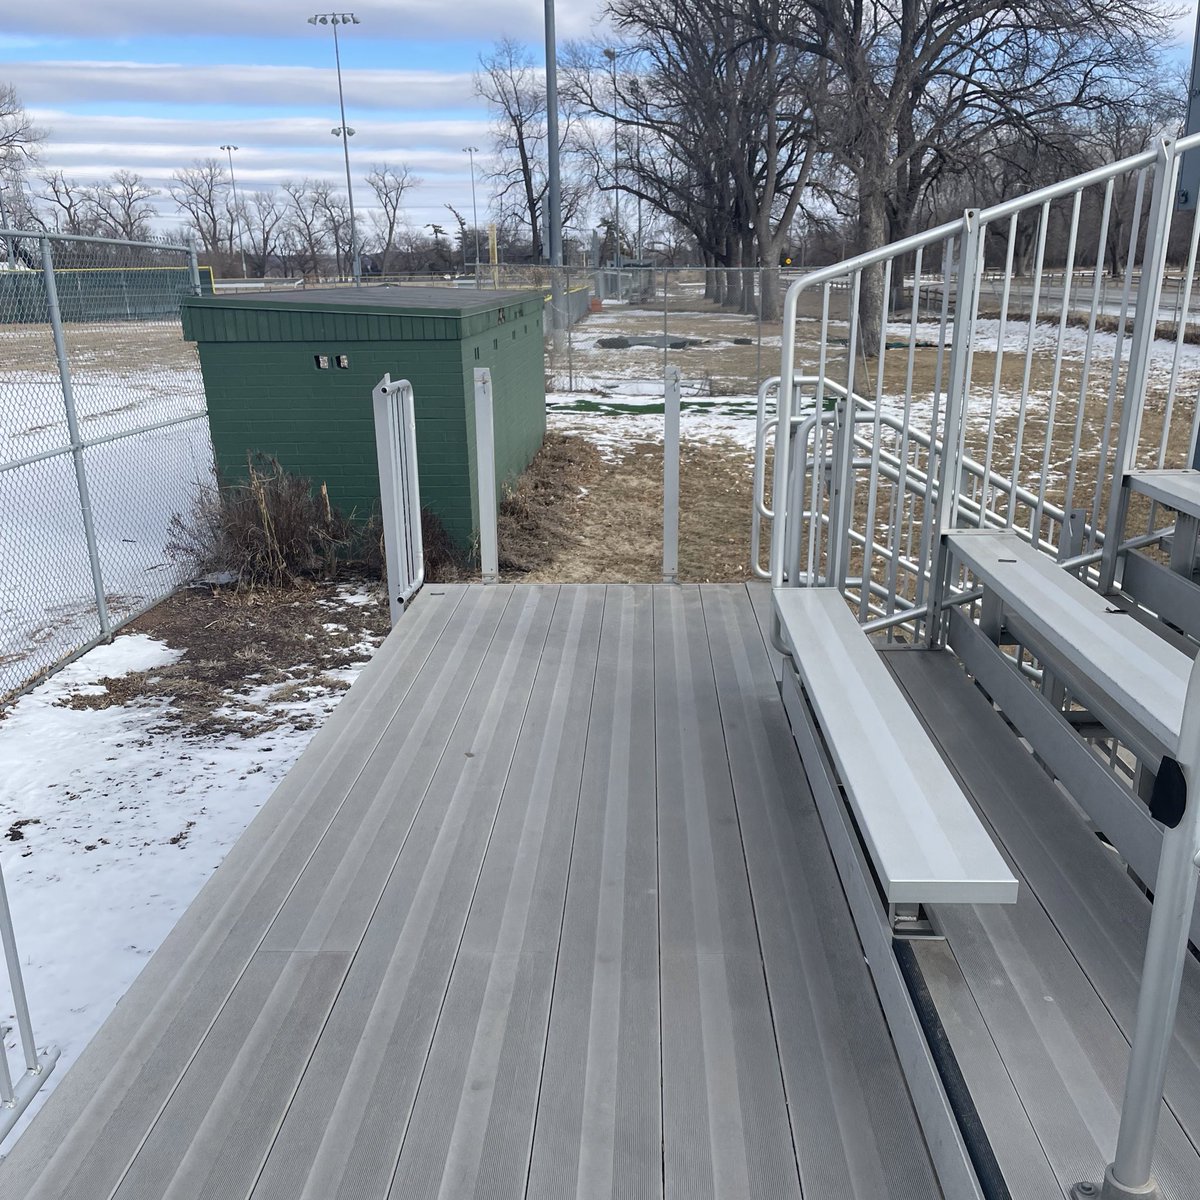 #DundeeNews | #DundeeSports: Our neighborhood high school - @OPSCentralHigh - baseball team @OPSCHSBSB had their stadium, field &amp; equipment vandalized. Season six weeks out. A lot of #DundeeKids have played at Boyd Baseball Complex &amp; Park. How can we be of service? 